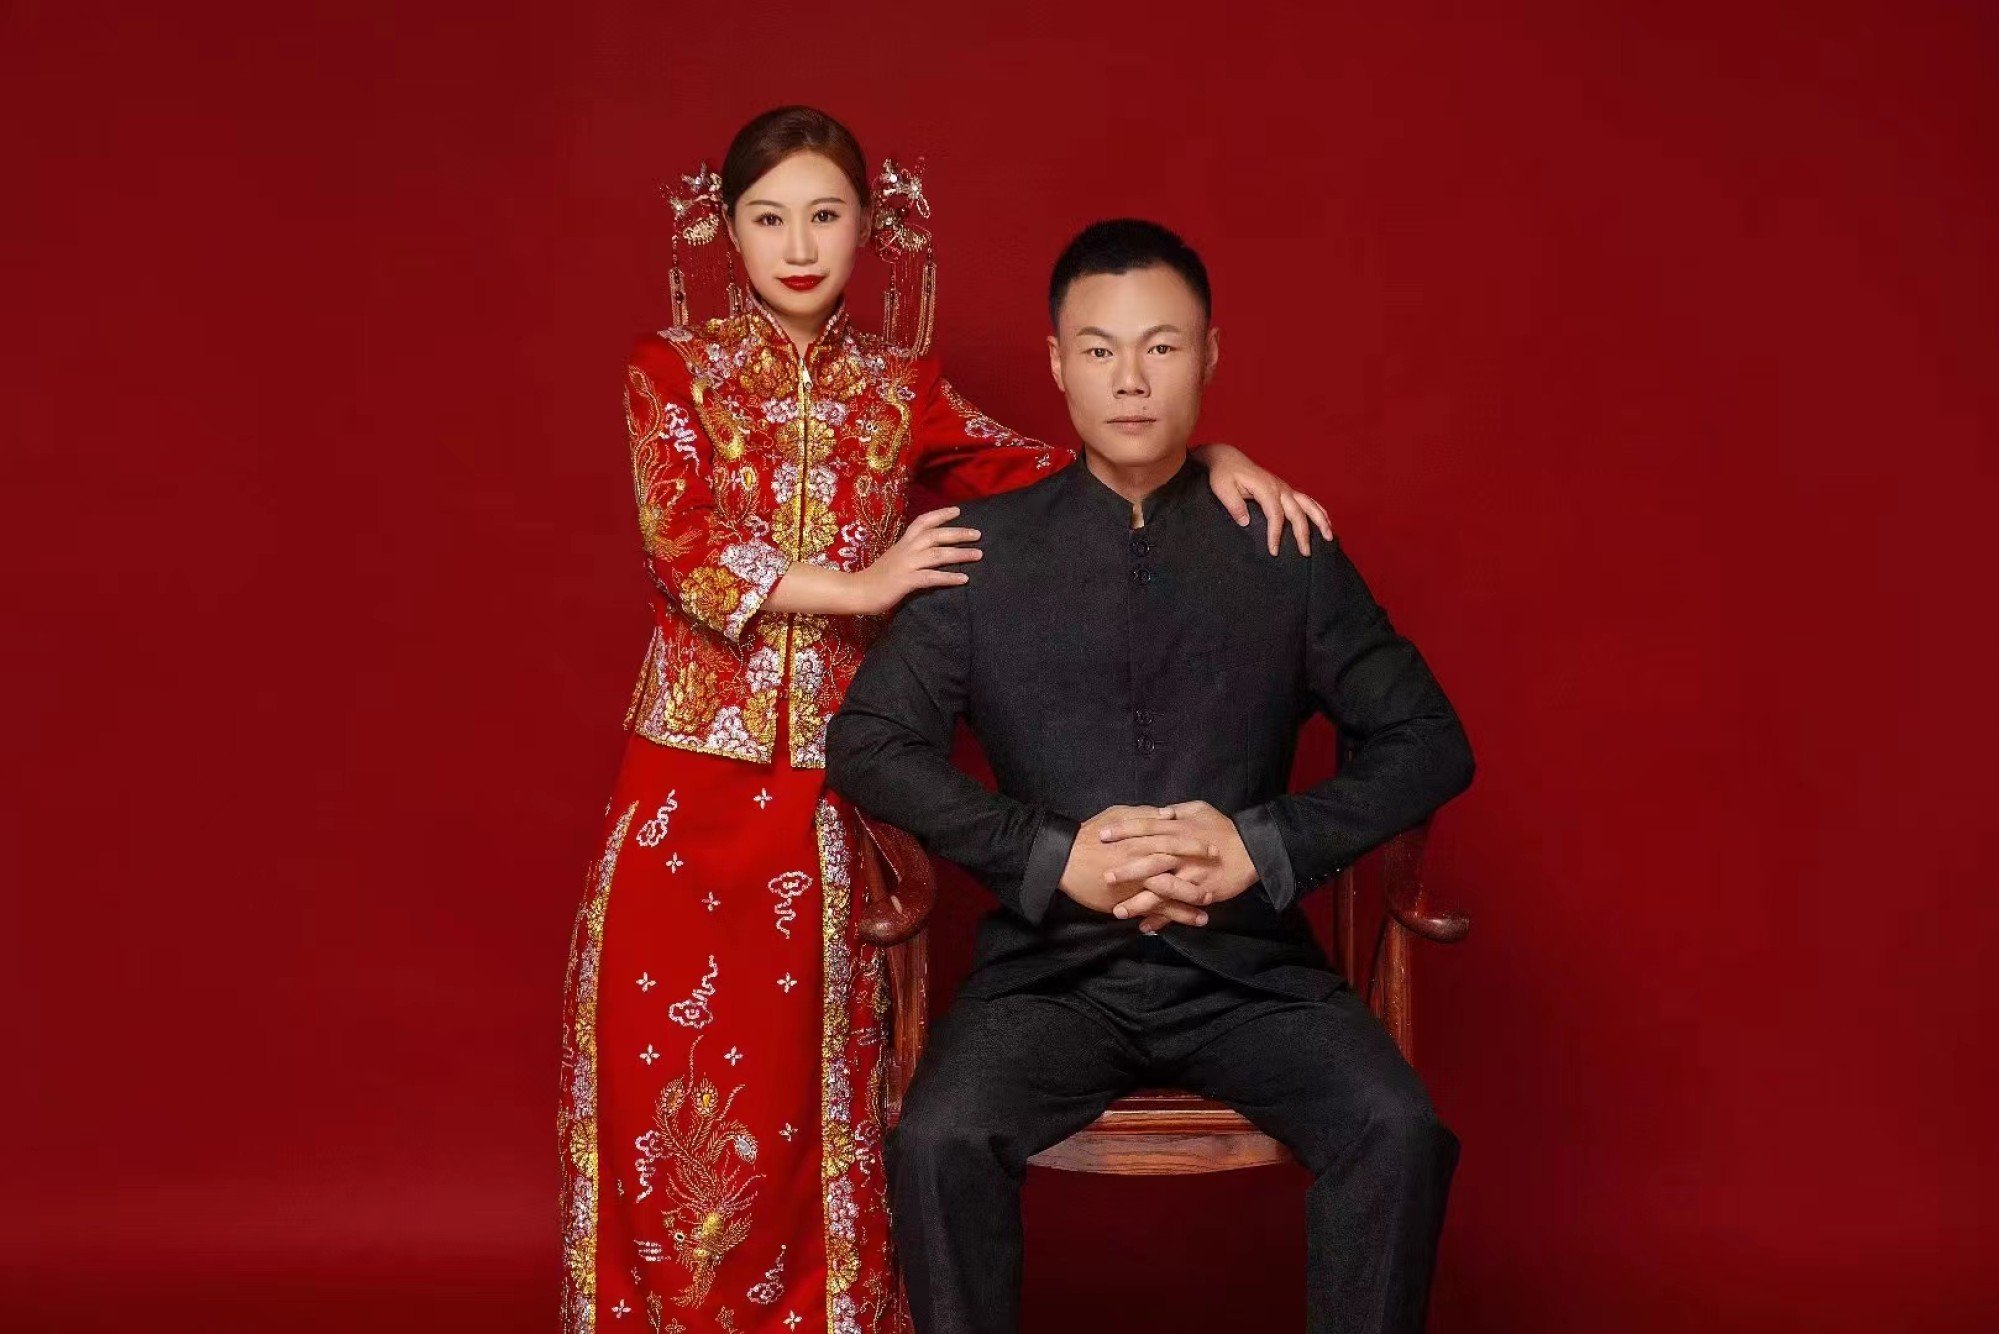 Kong (left) can now stand for short periods with support. She posed with Zhang for belated wedding photos in 2020. Photo: Zhang Mingrong.